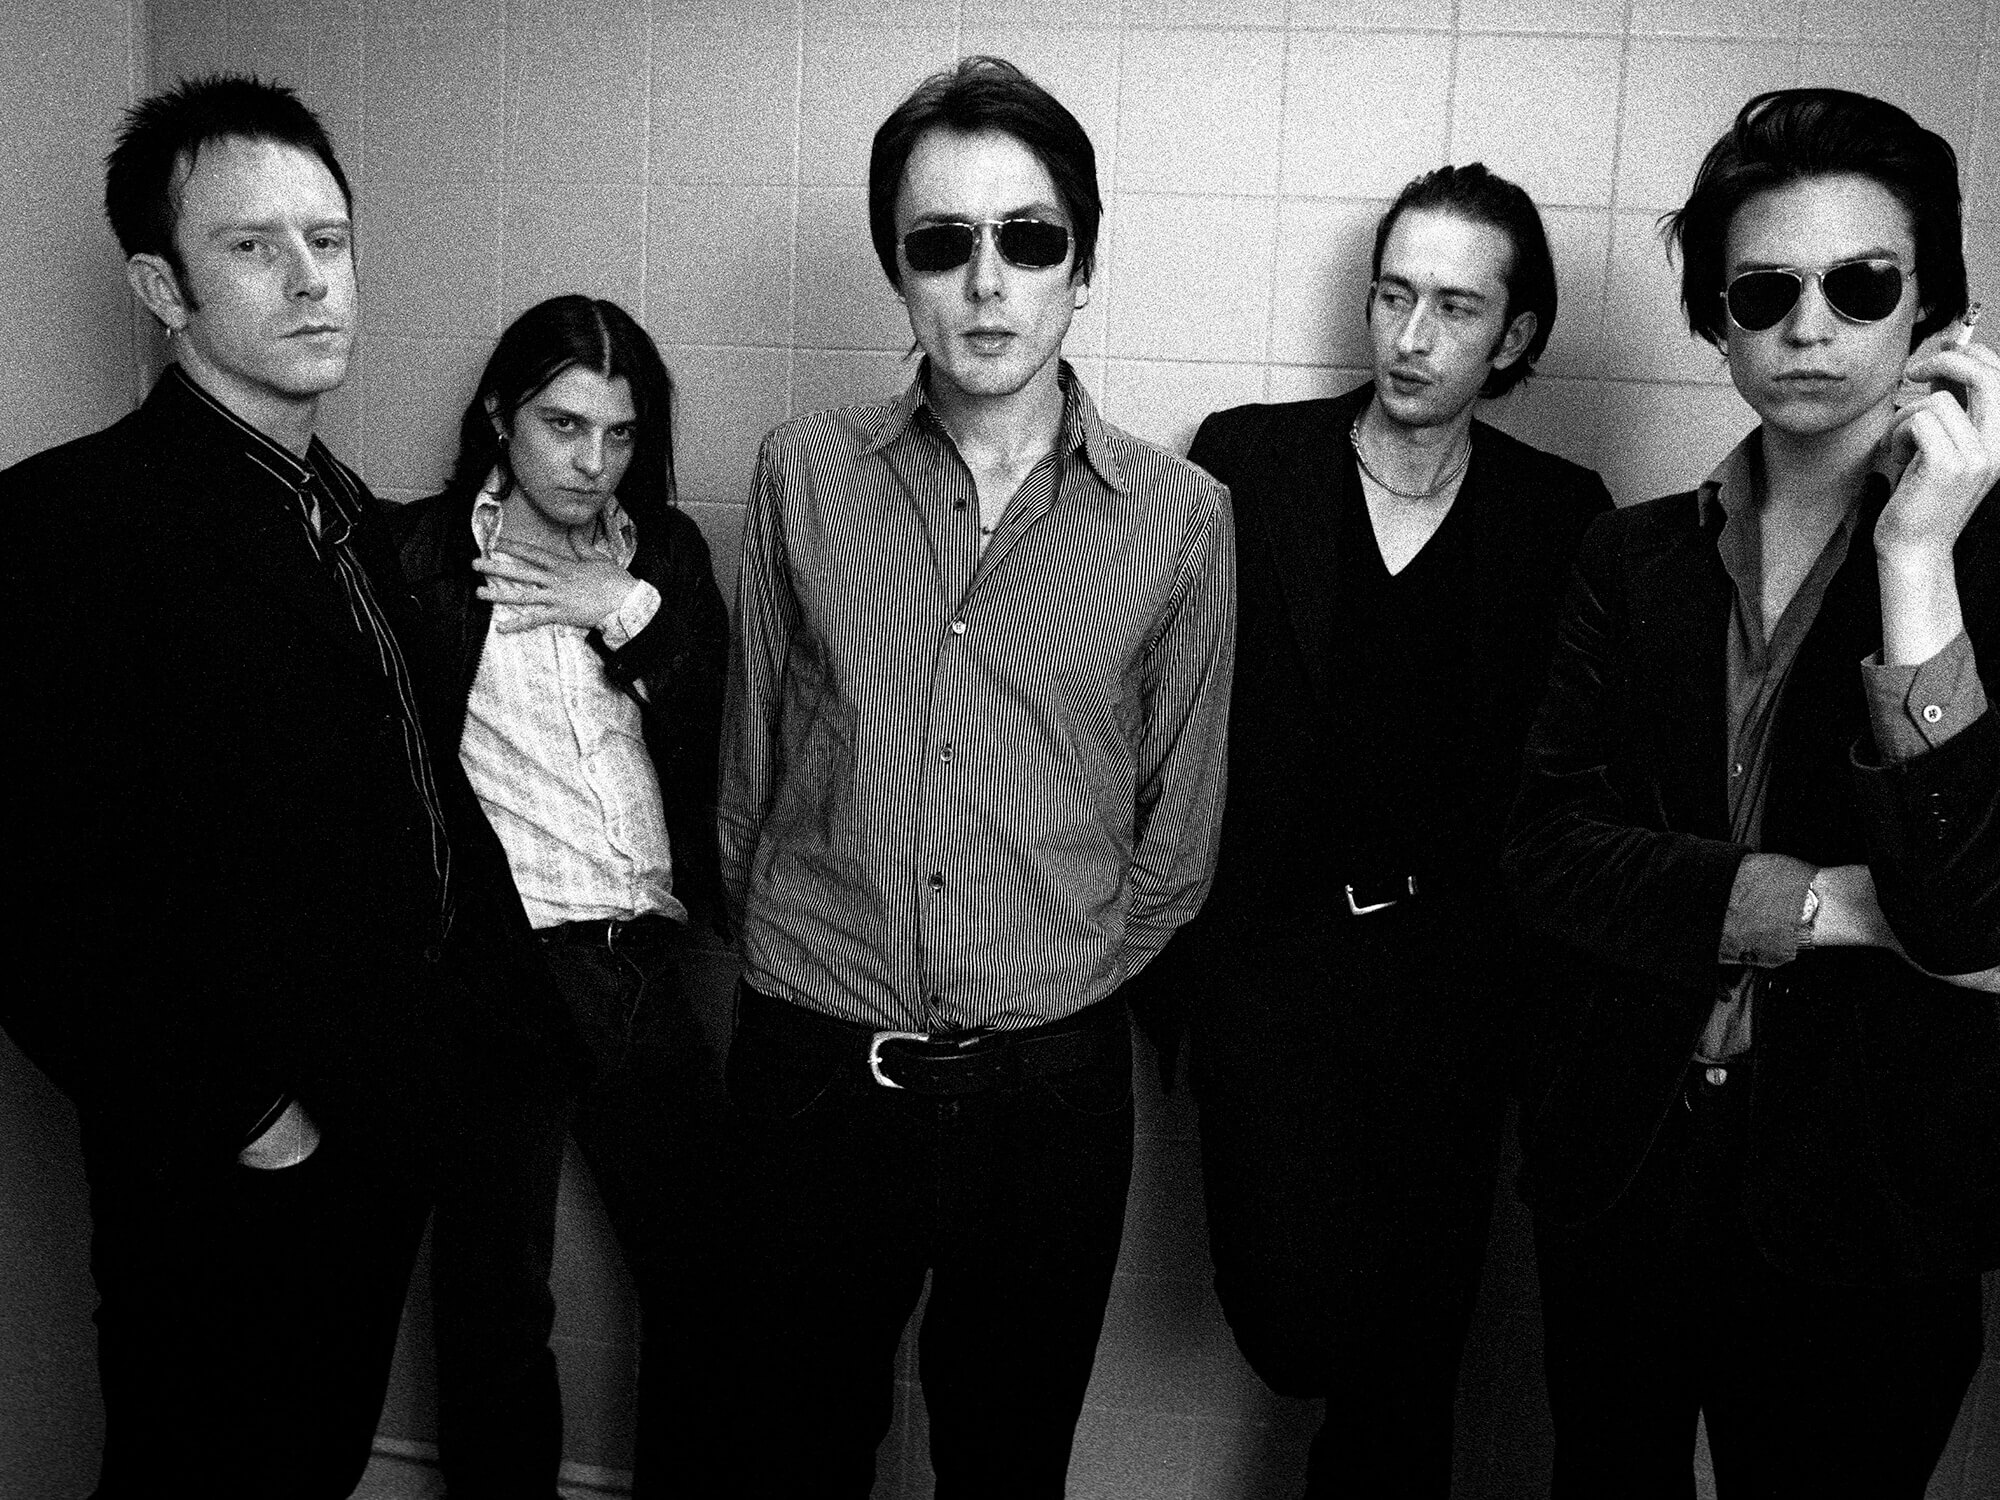 The Genius Of… Coming Up by Suede